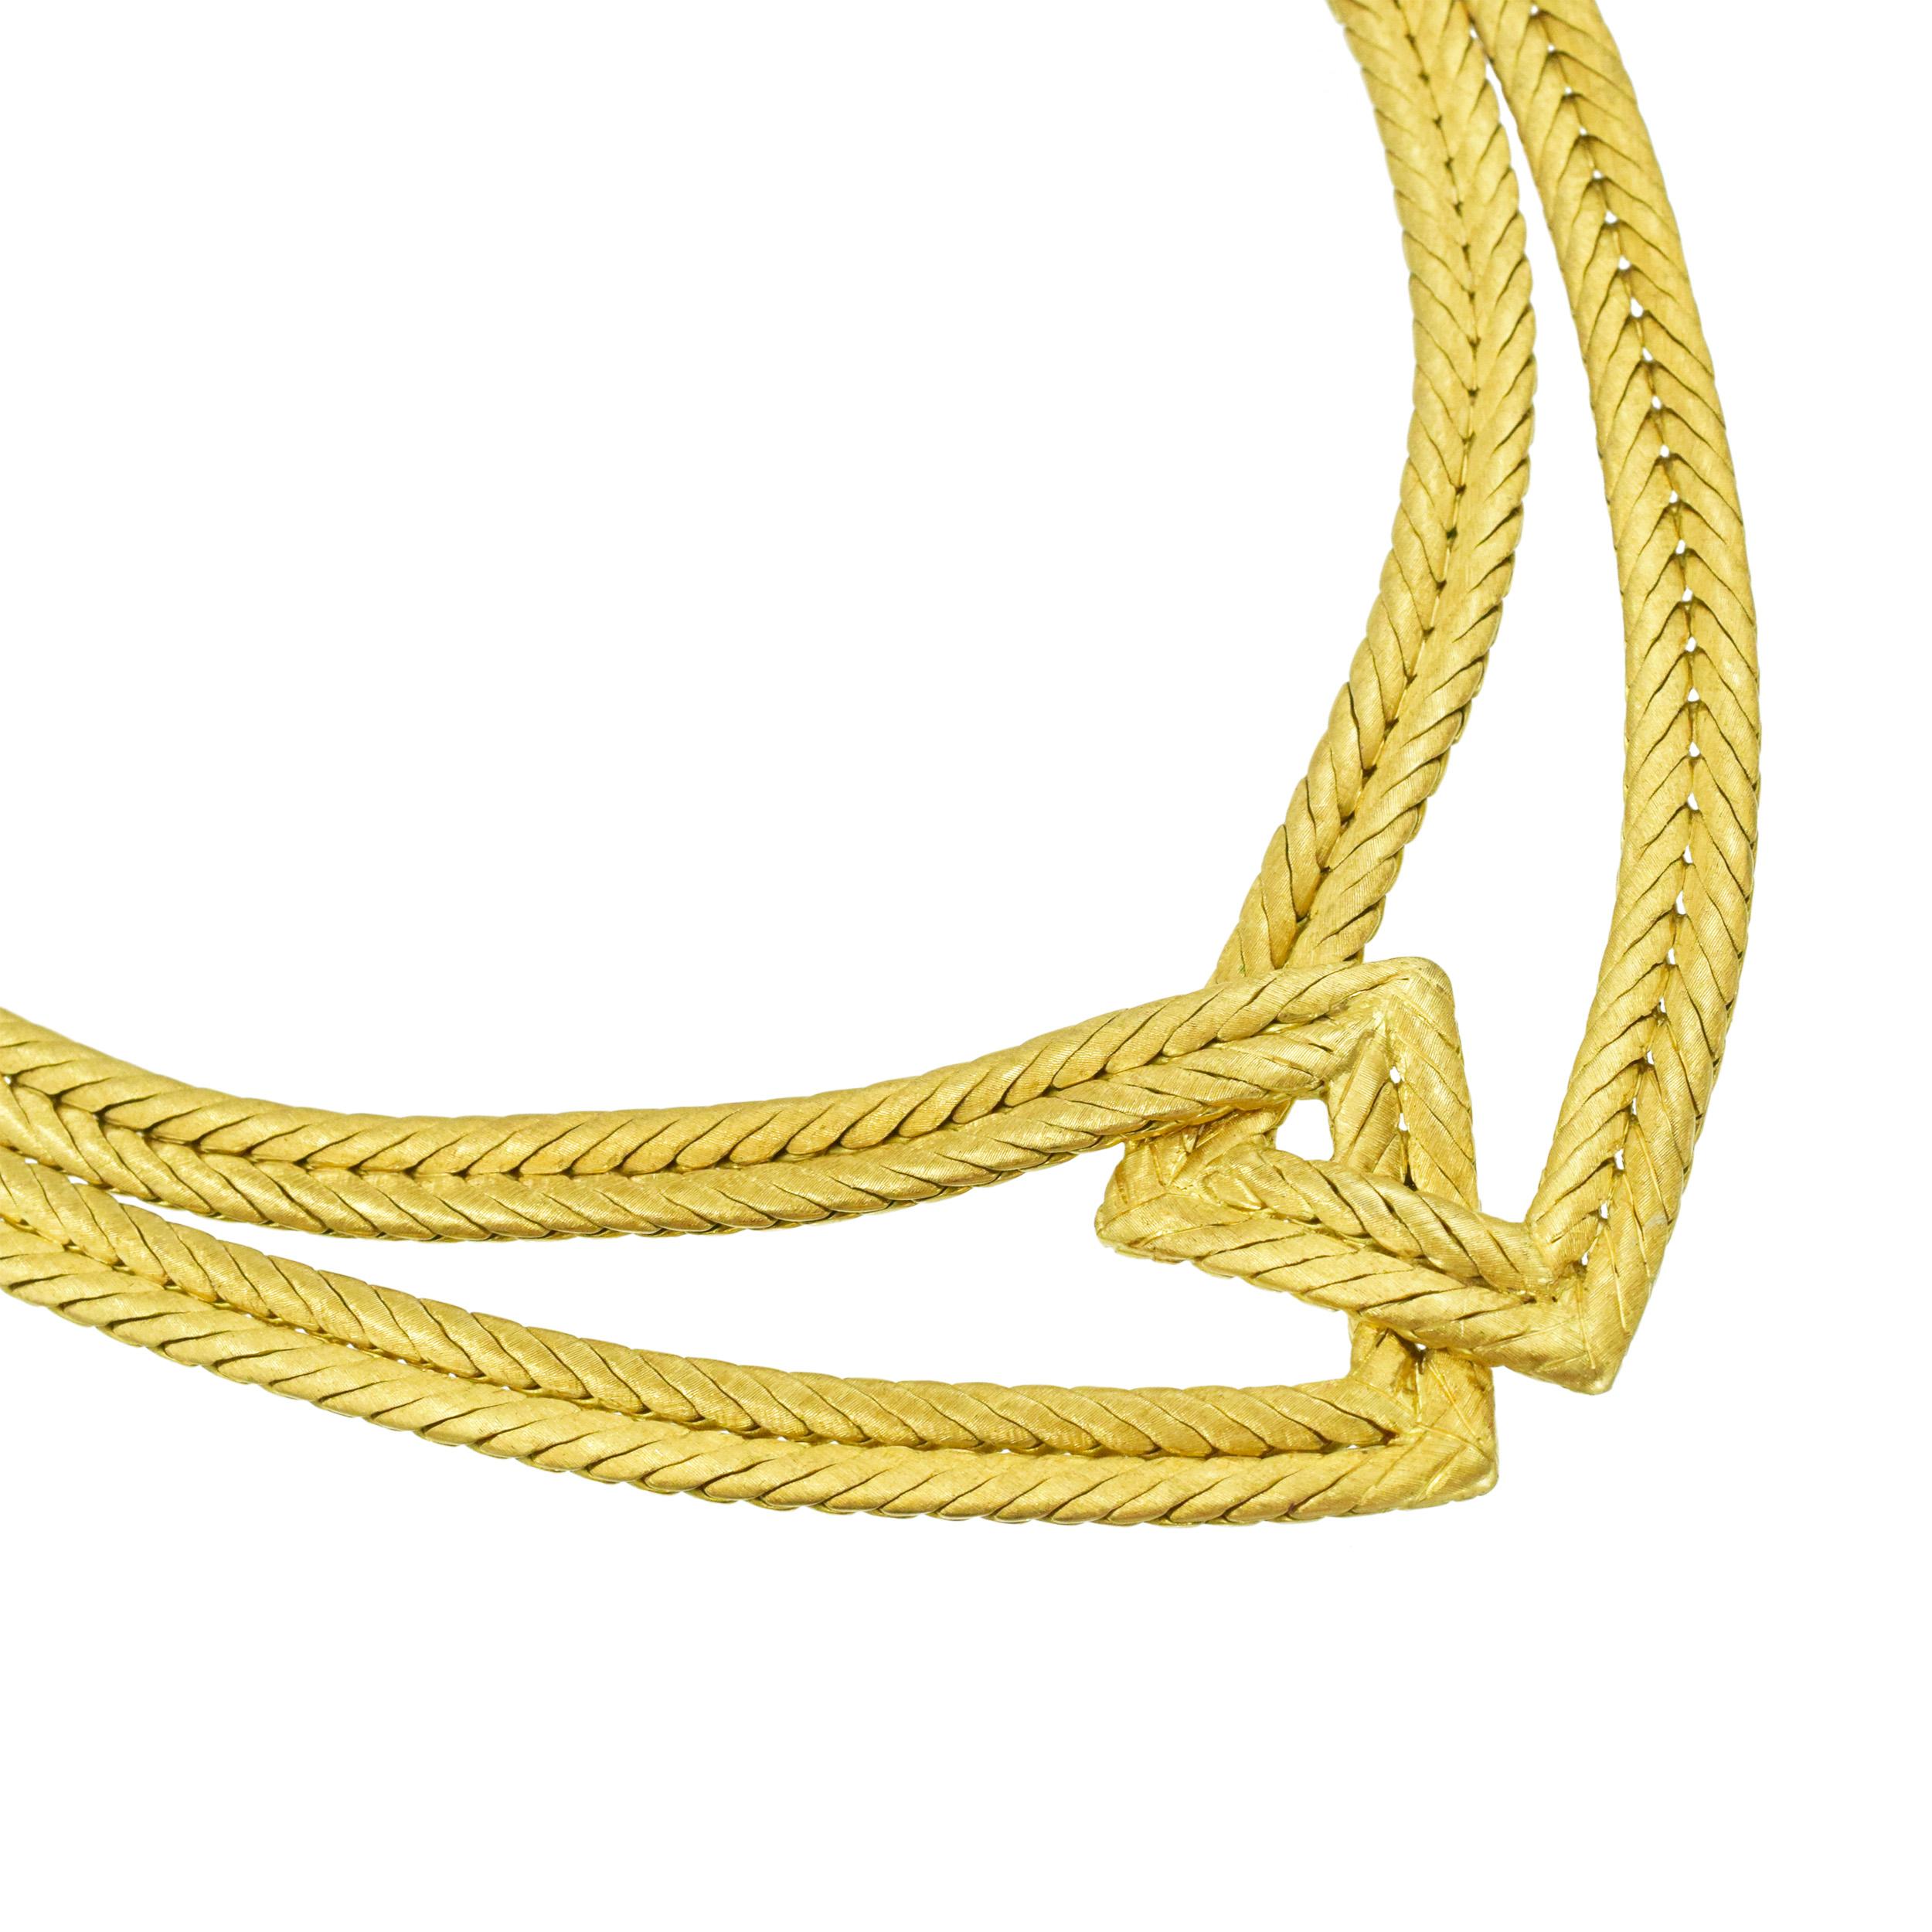 Women's Buccellati Woven Choker Necklace in 18k yellow gold For Sale